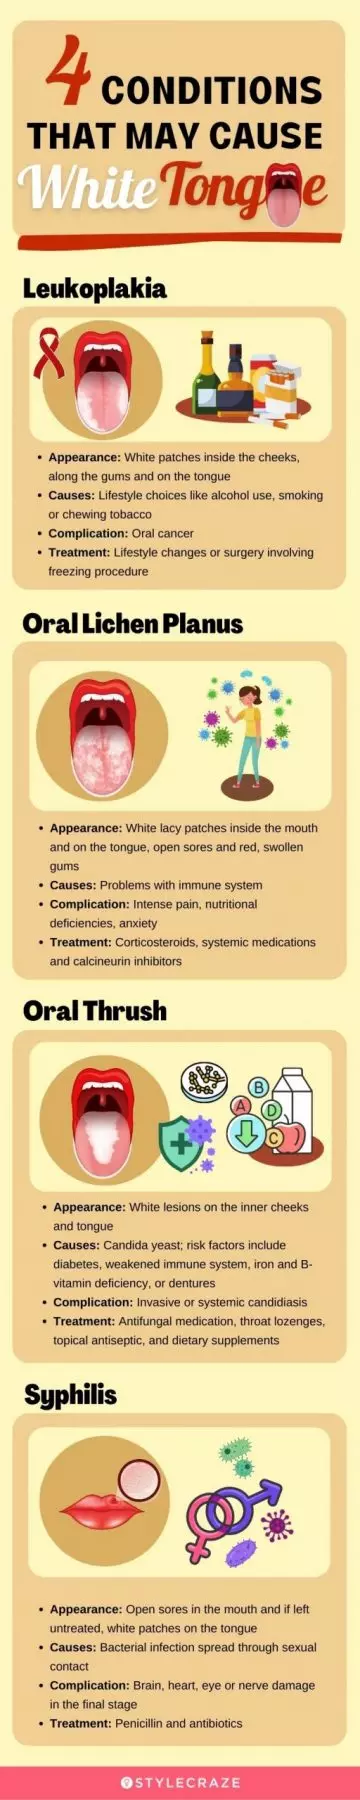 4 conditions that may cause white tongue (infographic)